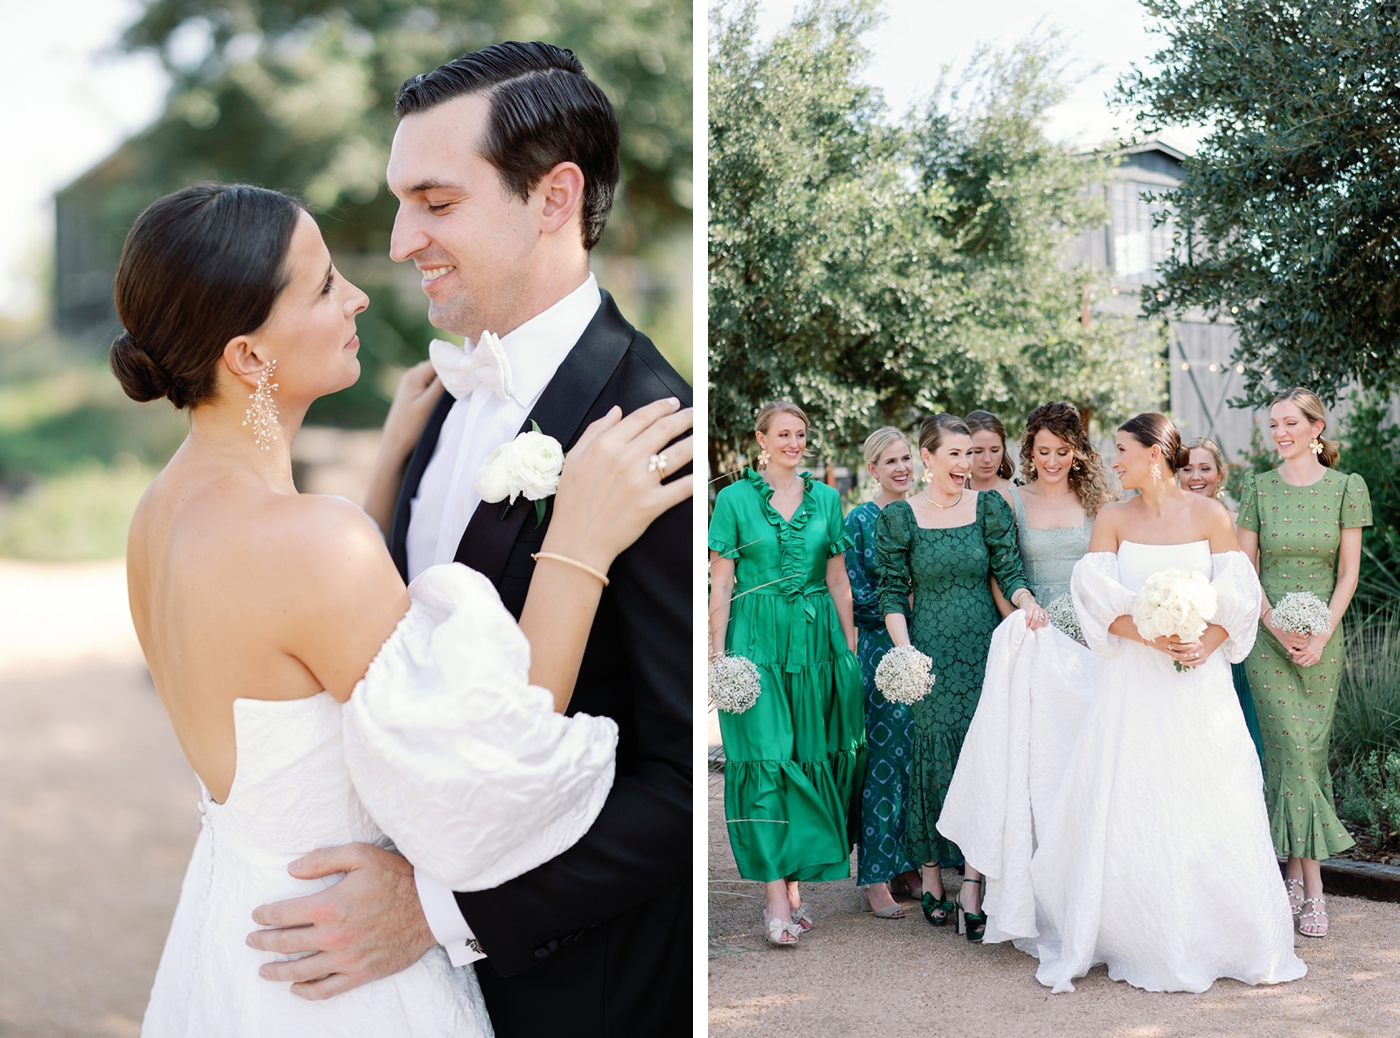 Couple embracing outdoors at their wedding venue in Austin 